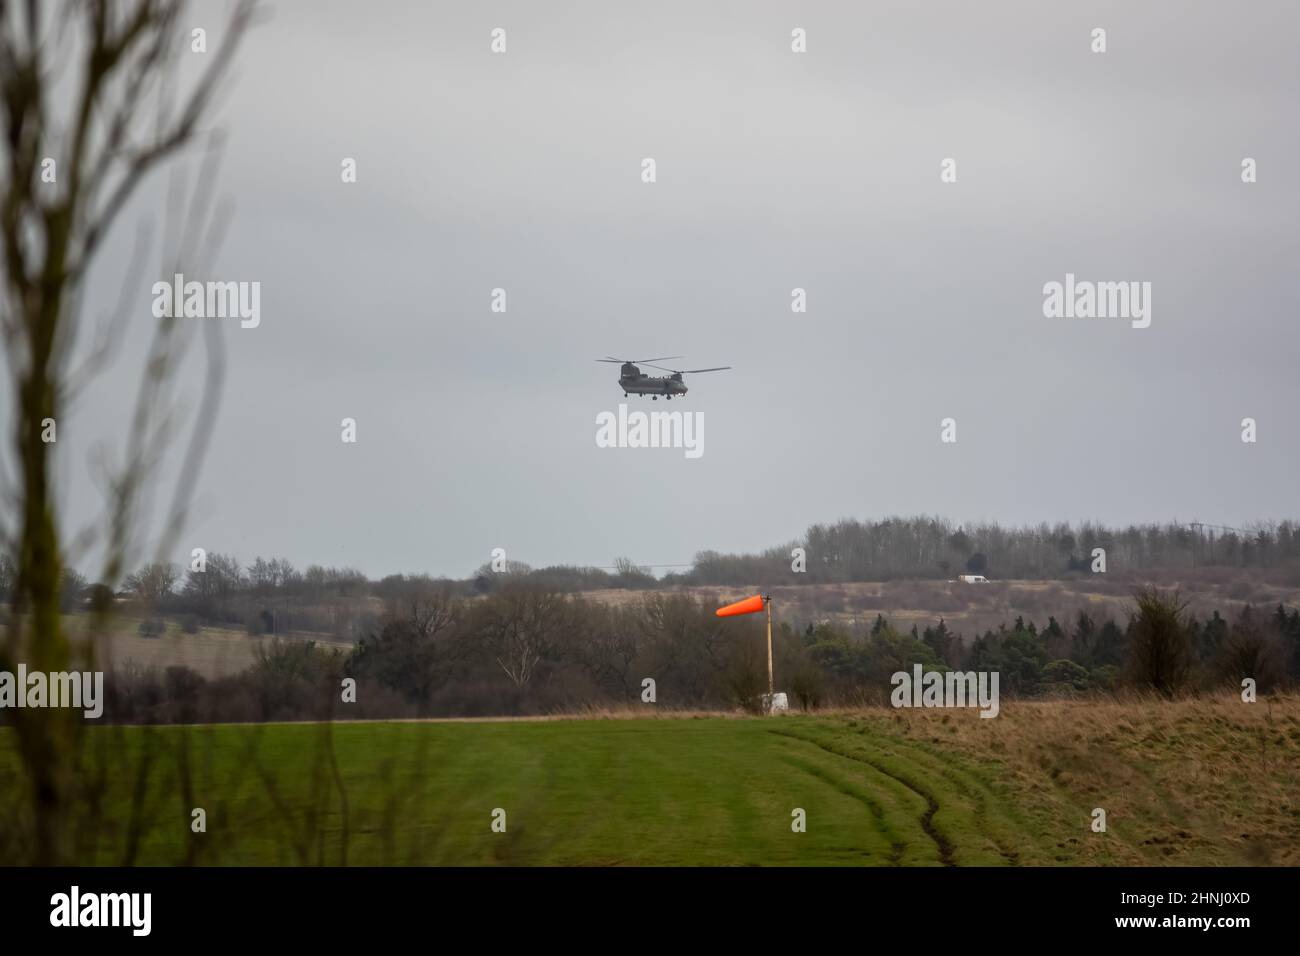 RAF Chinook tandem-rotor CH-47 helicopter flying fast and low in a cloudy blue grey sky on a military battle exercise, Wilts UK Stock Photo